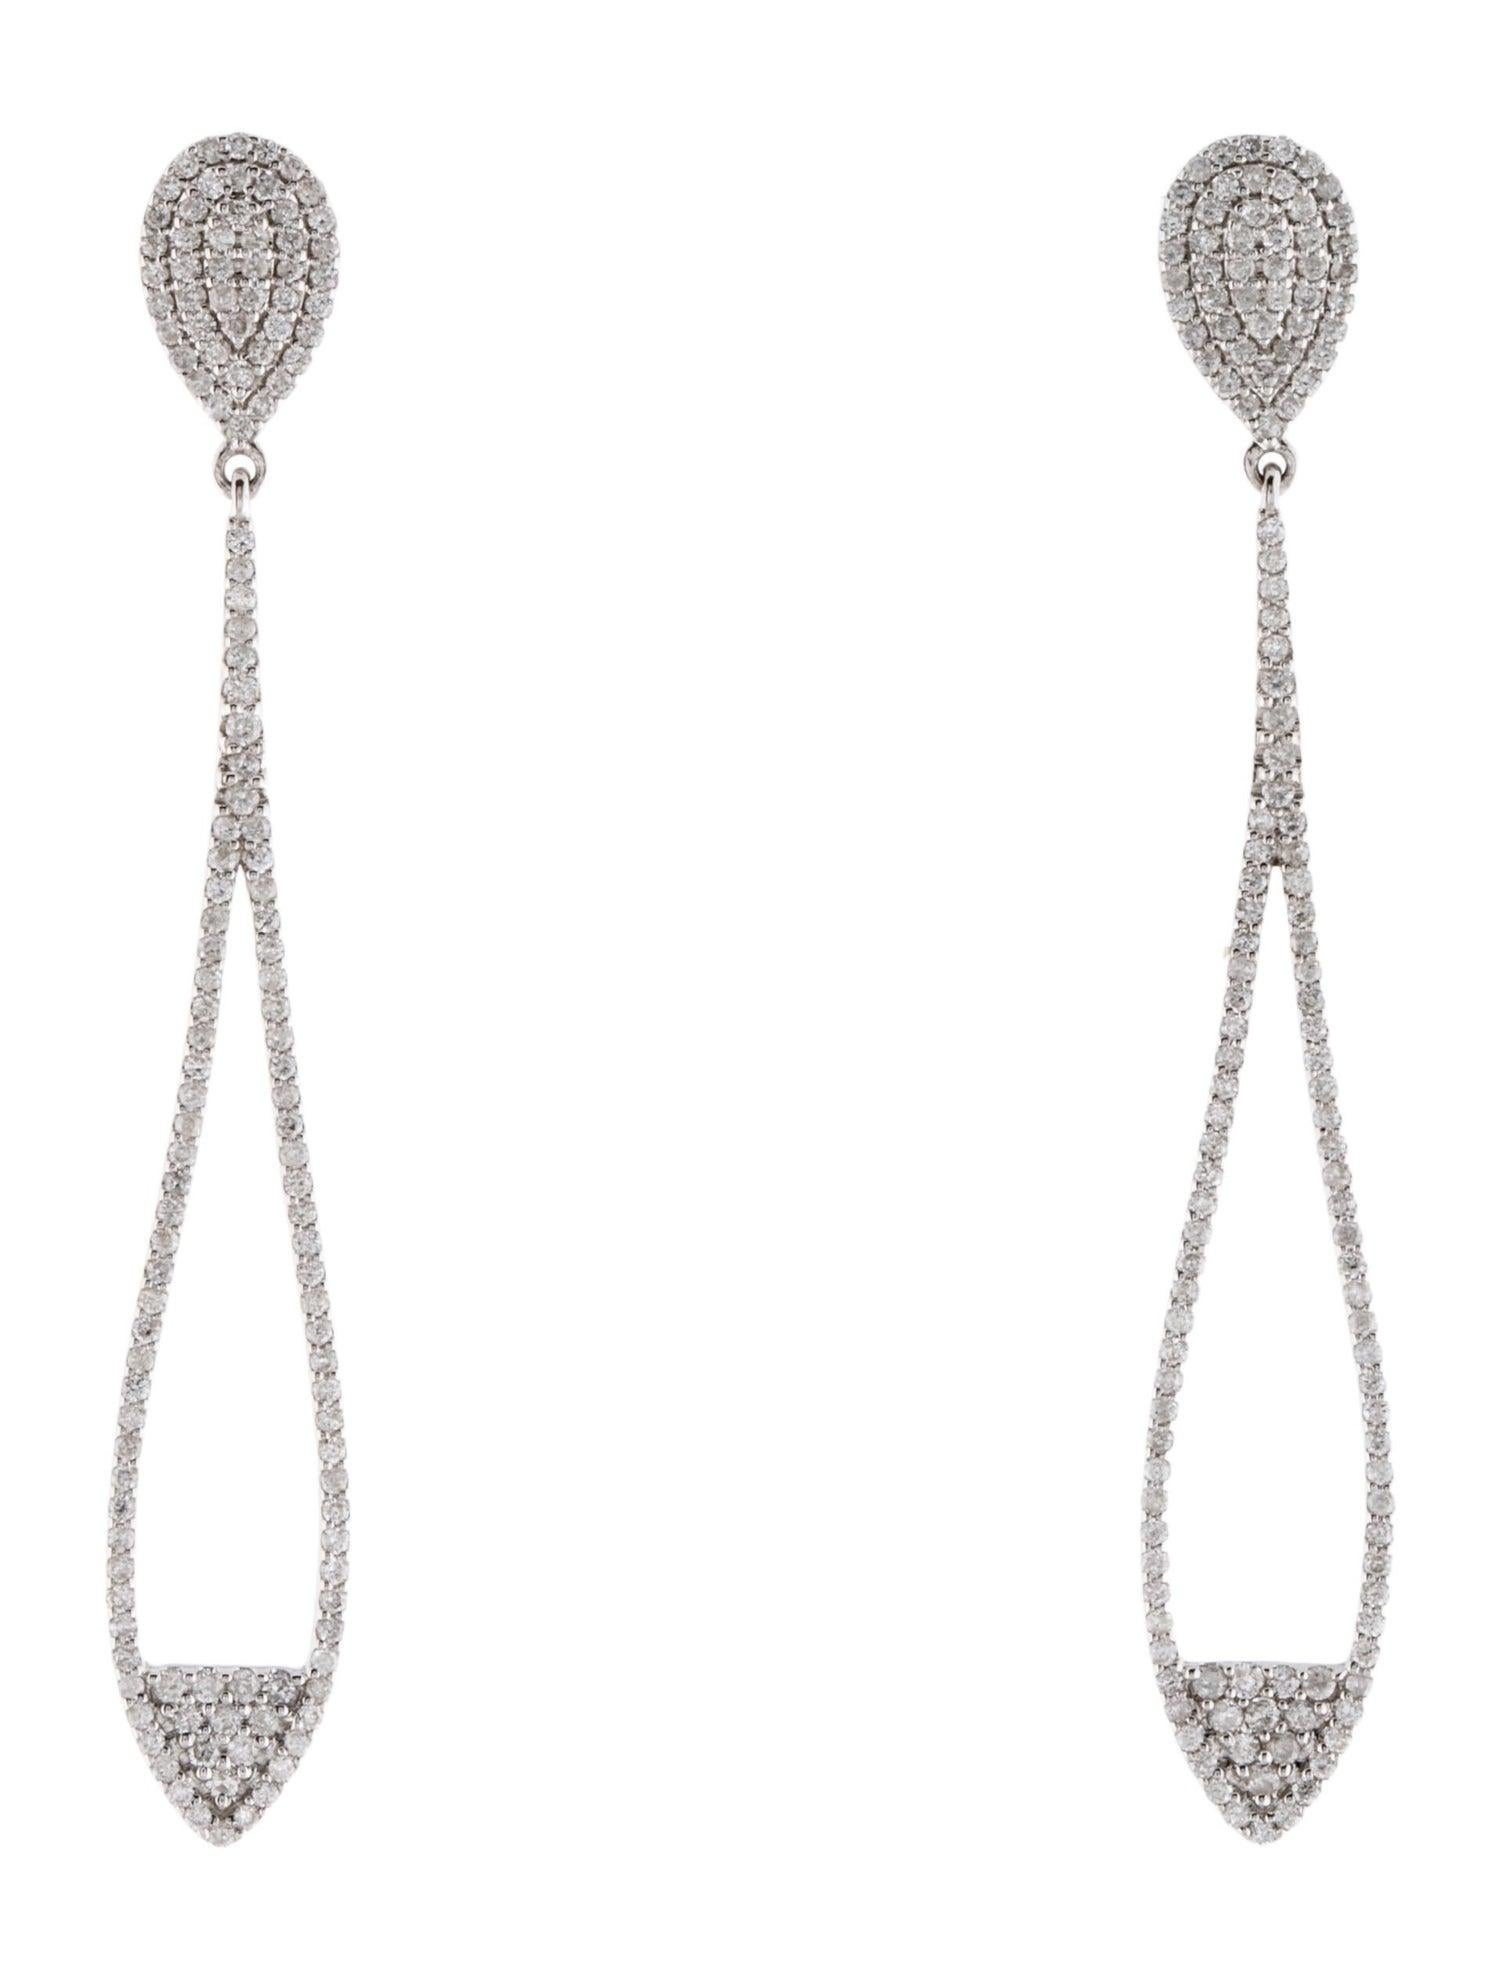 Introducing our captivating 14K White Gold Diamond Drop Earrings, a stunning addition to any fine jewelry collection. These earrings feature a total of 276 round brilliant diamonds, weighing in at 0.55 carats. Each diamond has been meticulously